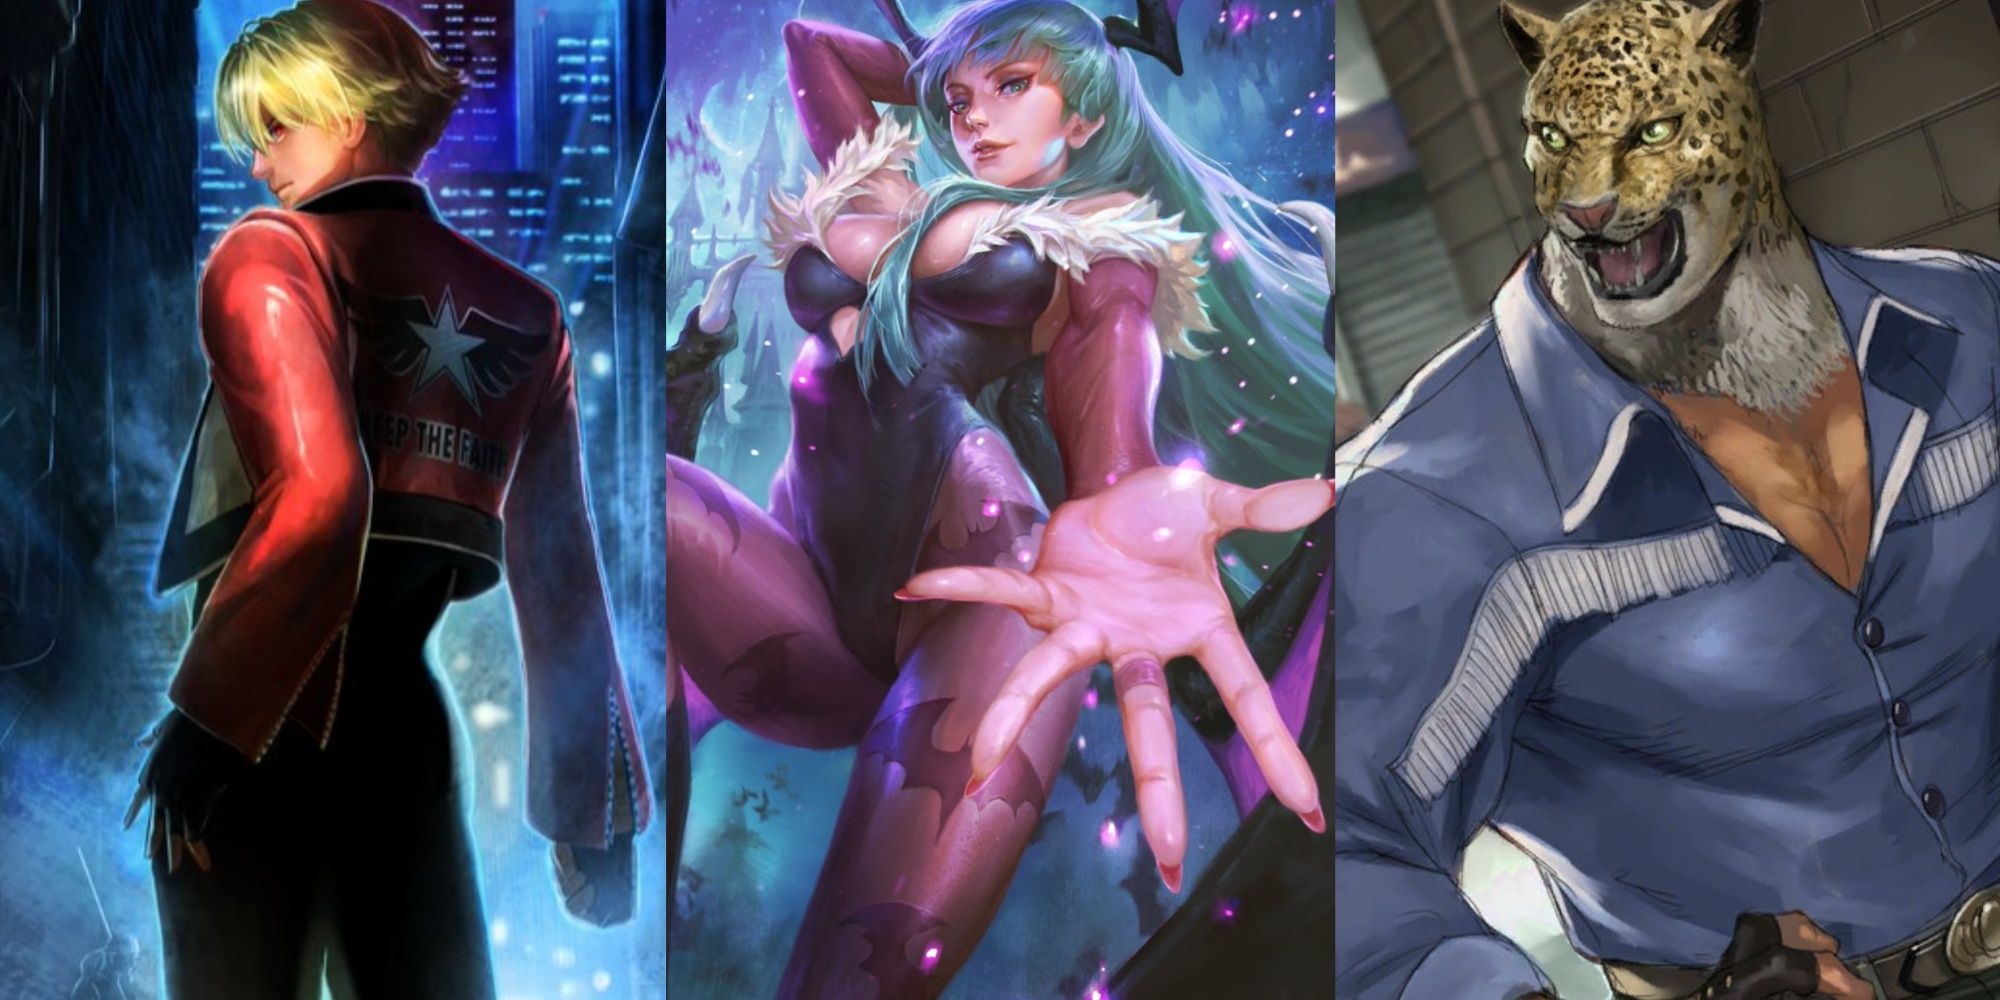 An image showcasing Rock Howard from The King of Fighters, Morrigan from Darkstalkers, and King from Tekken